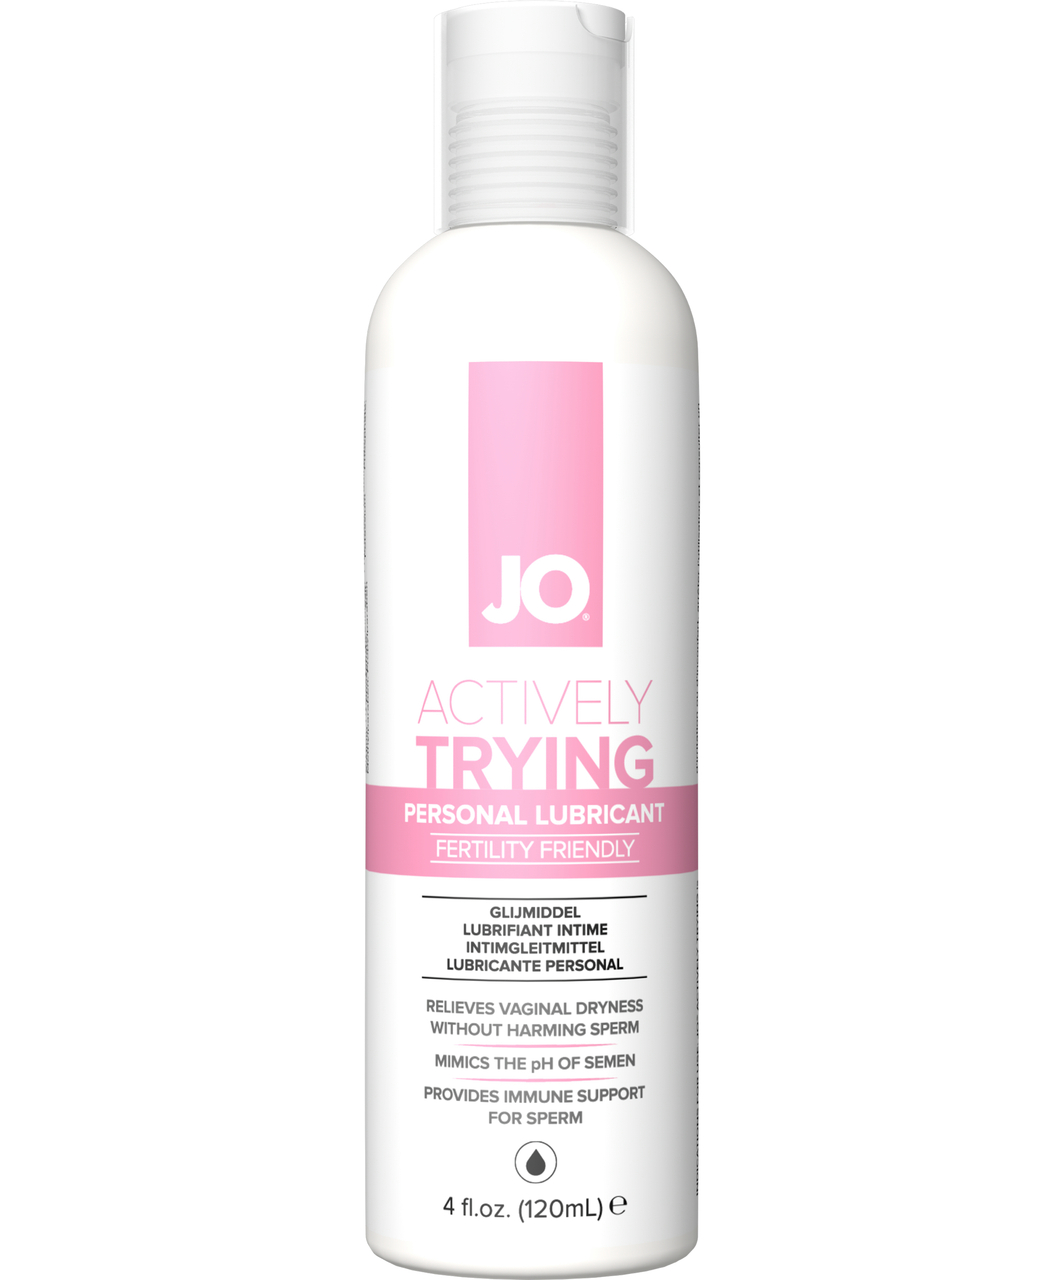 JO Actively Trying (120 ml)